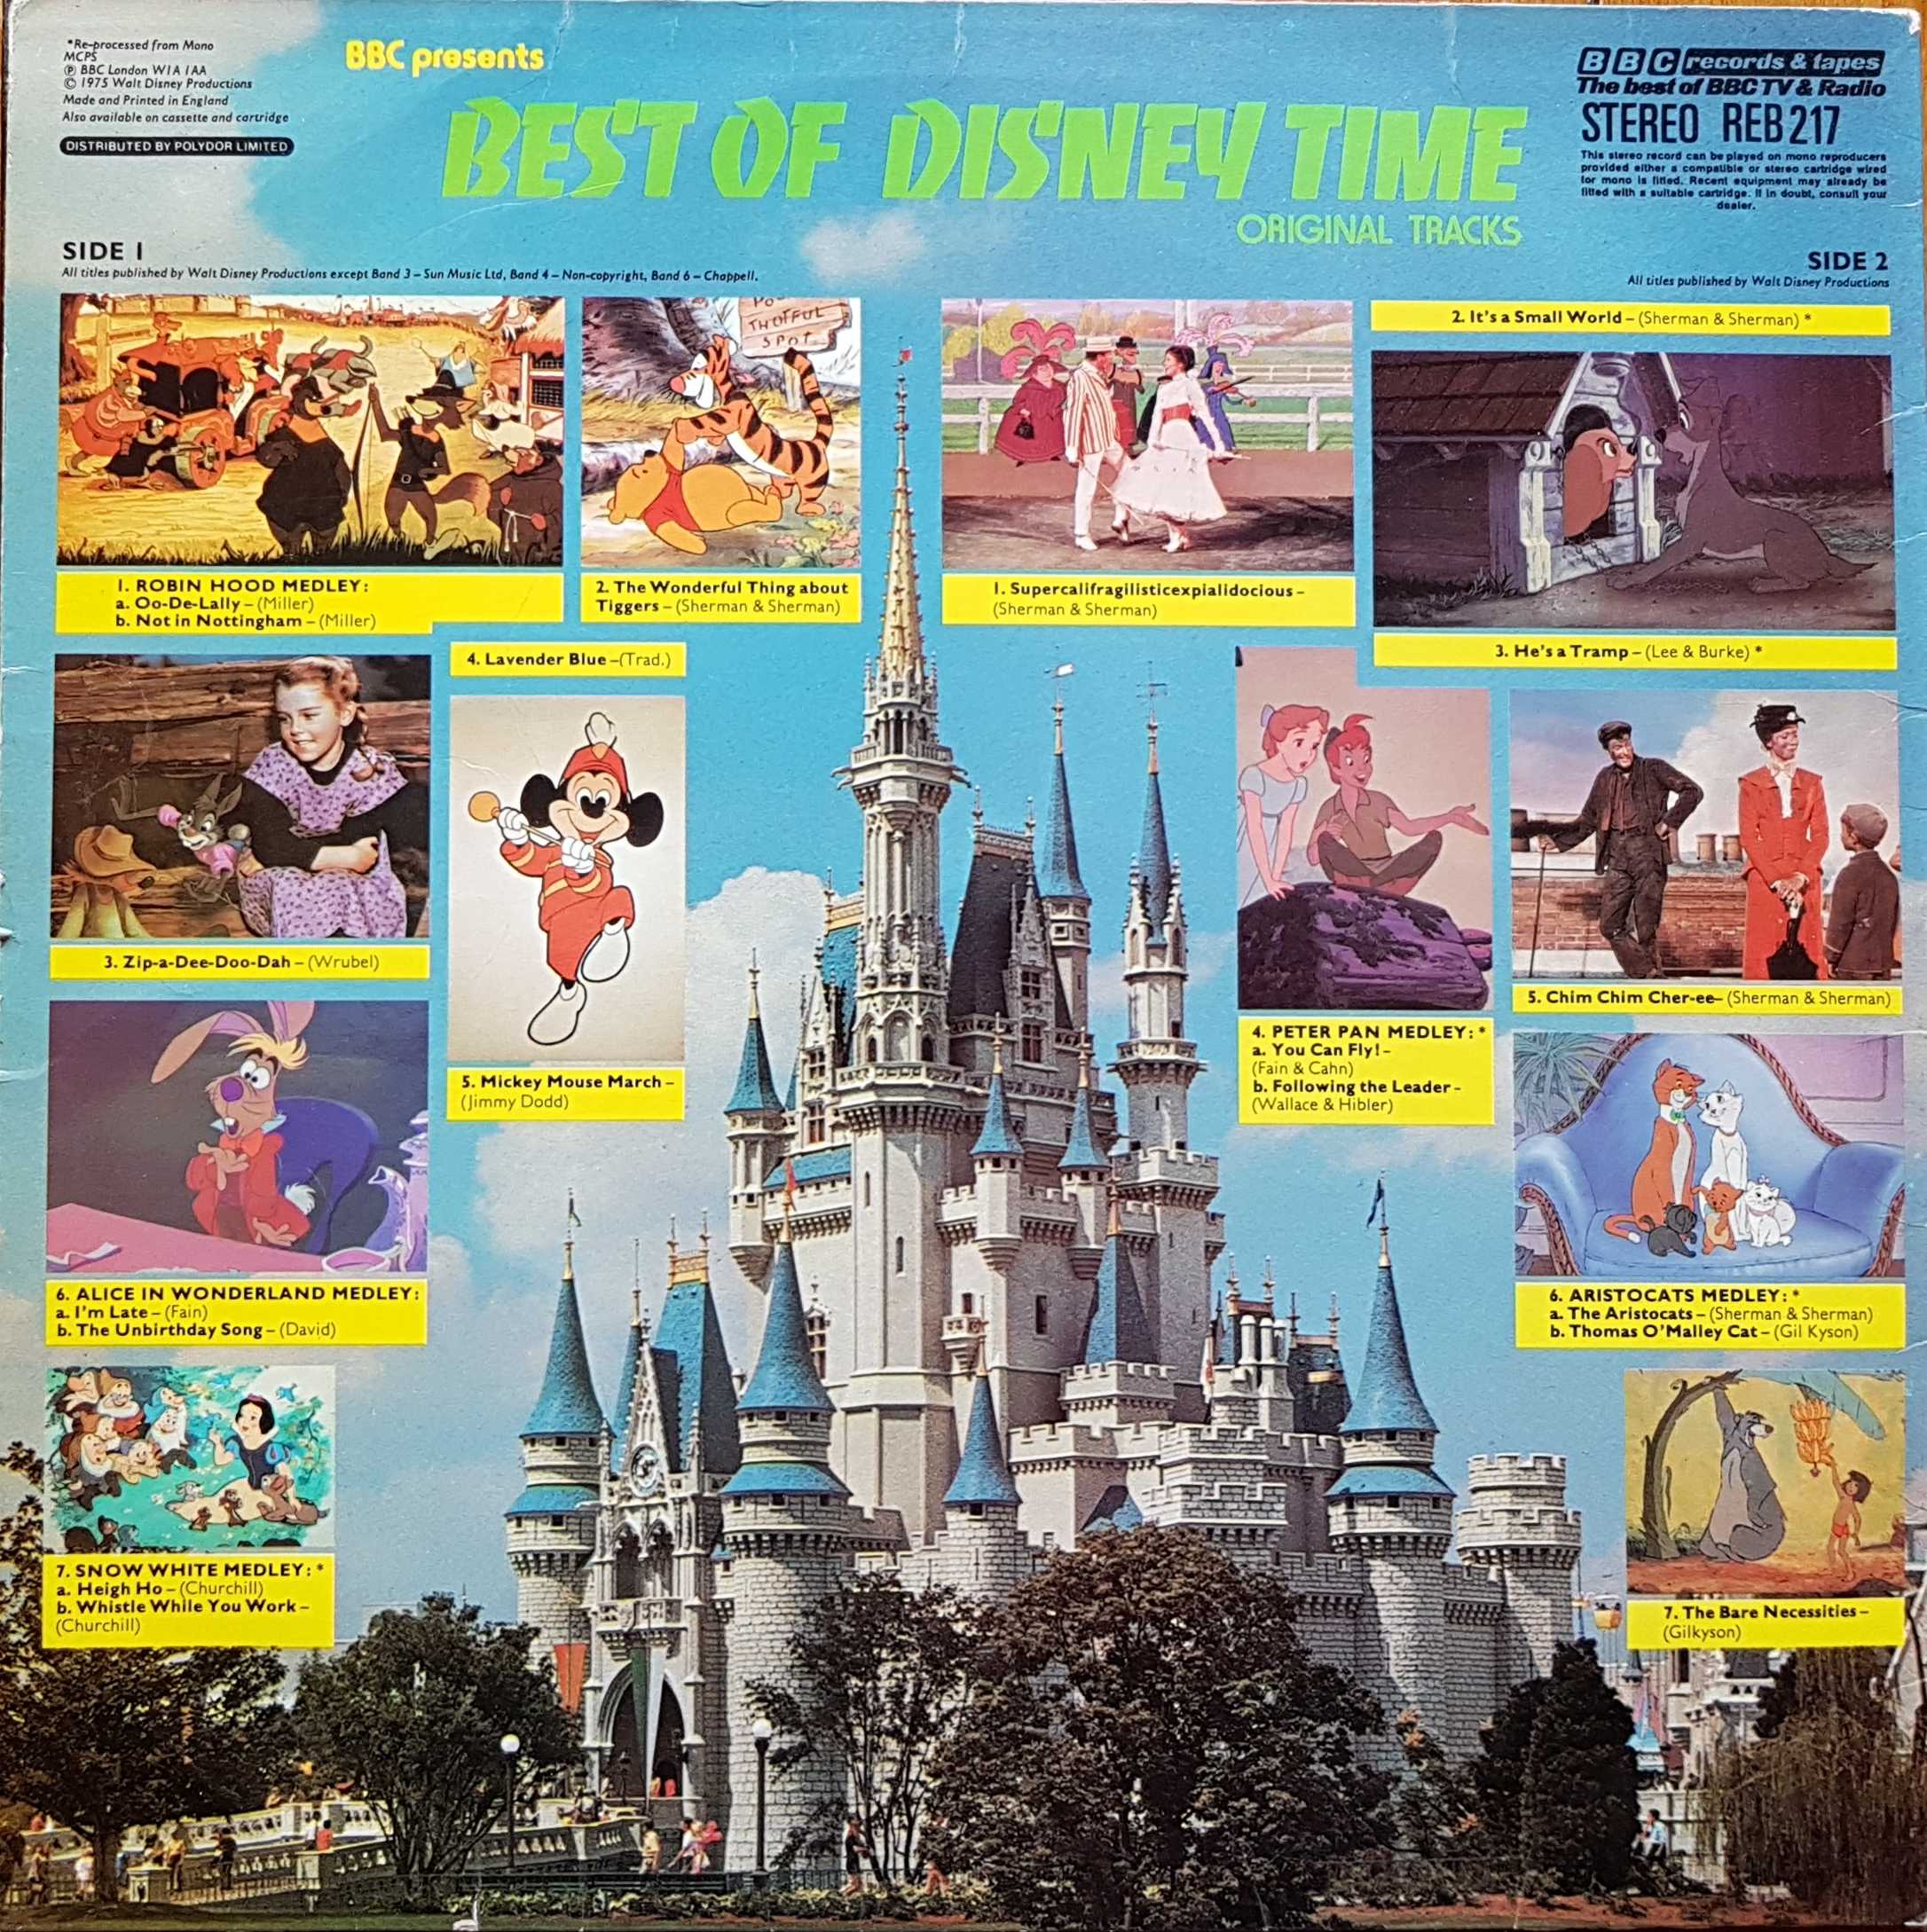 Picture of REB 217 BBC Presents - Best of Disney Time by artist Various from the BBC records and Tapes library